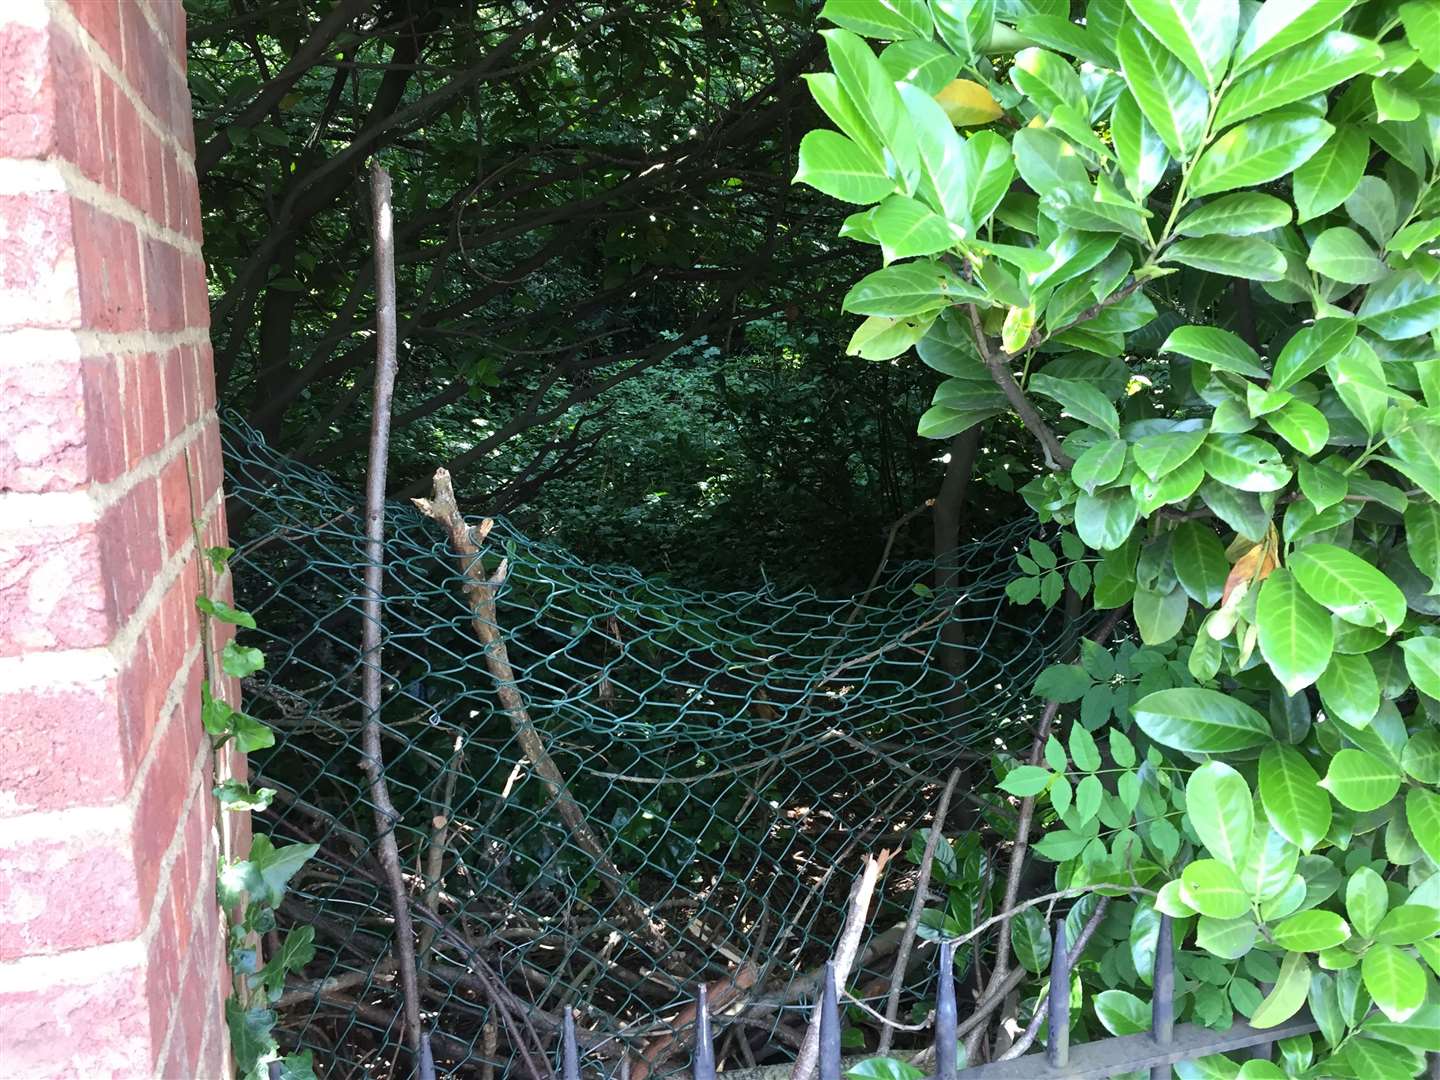 Gaps in fencing allow trespassers to gain entry to Herne Bay Court